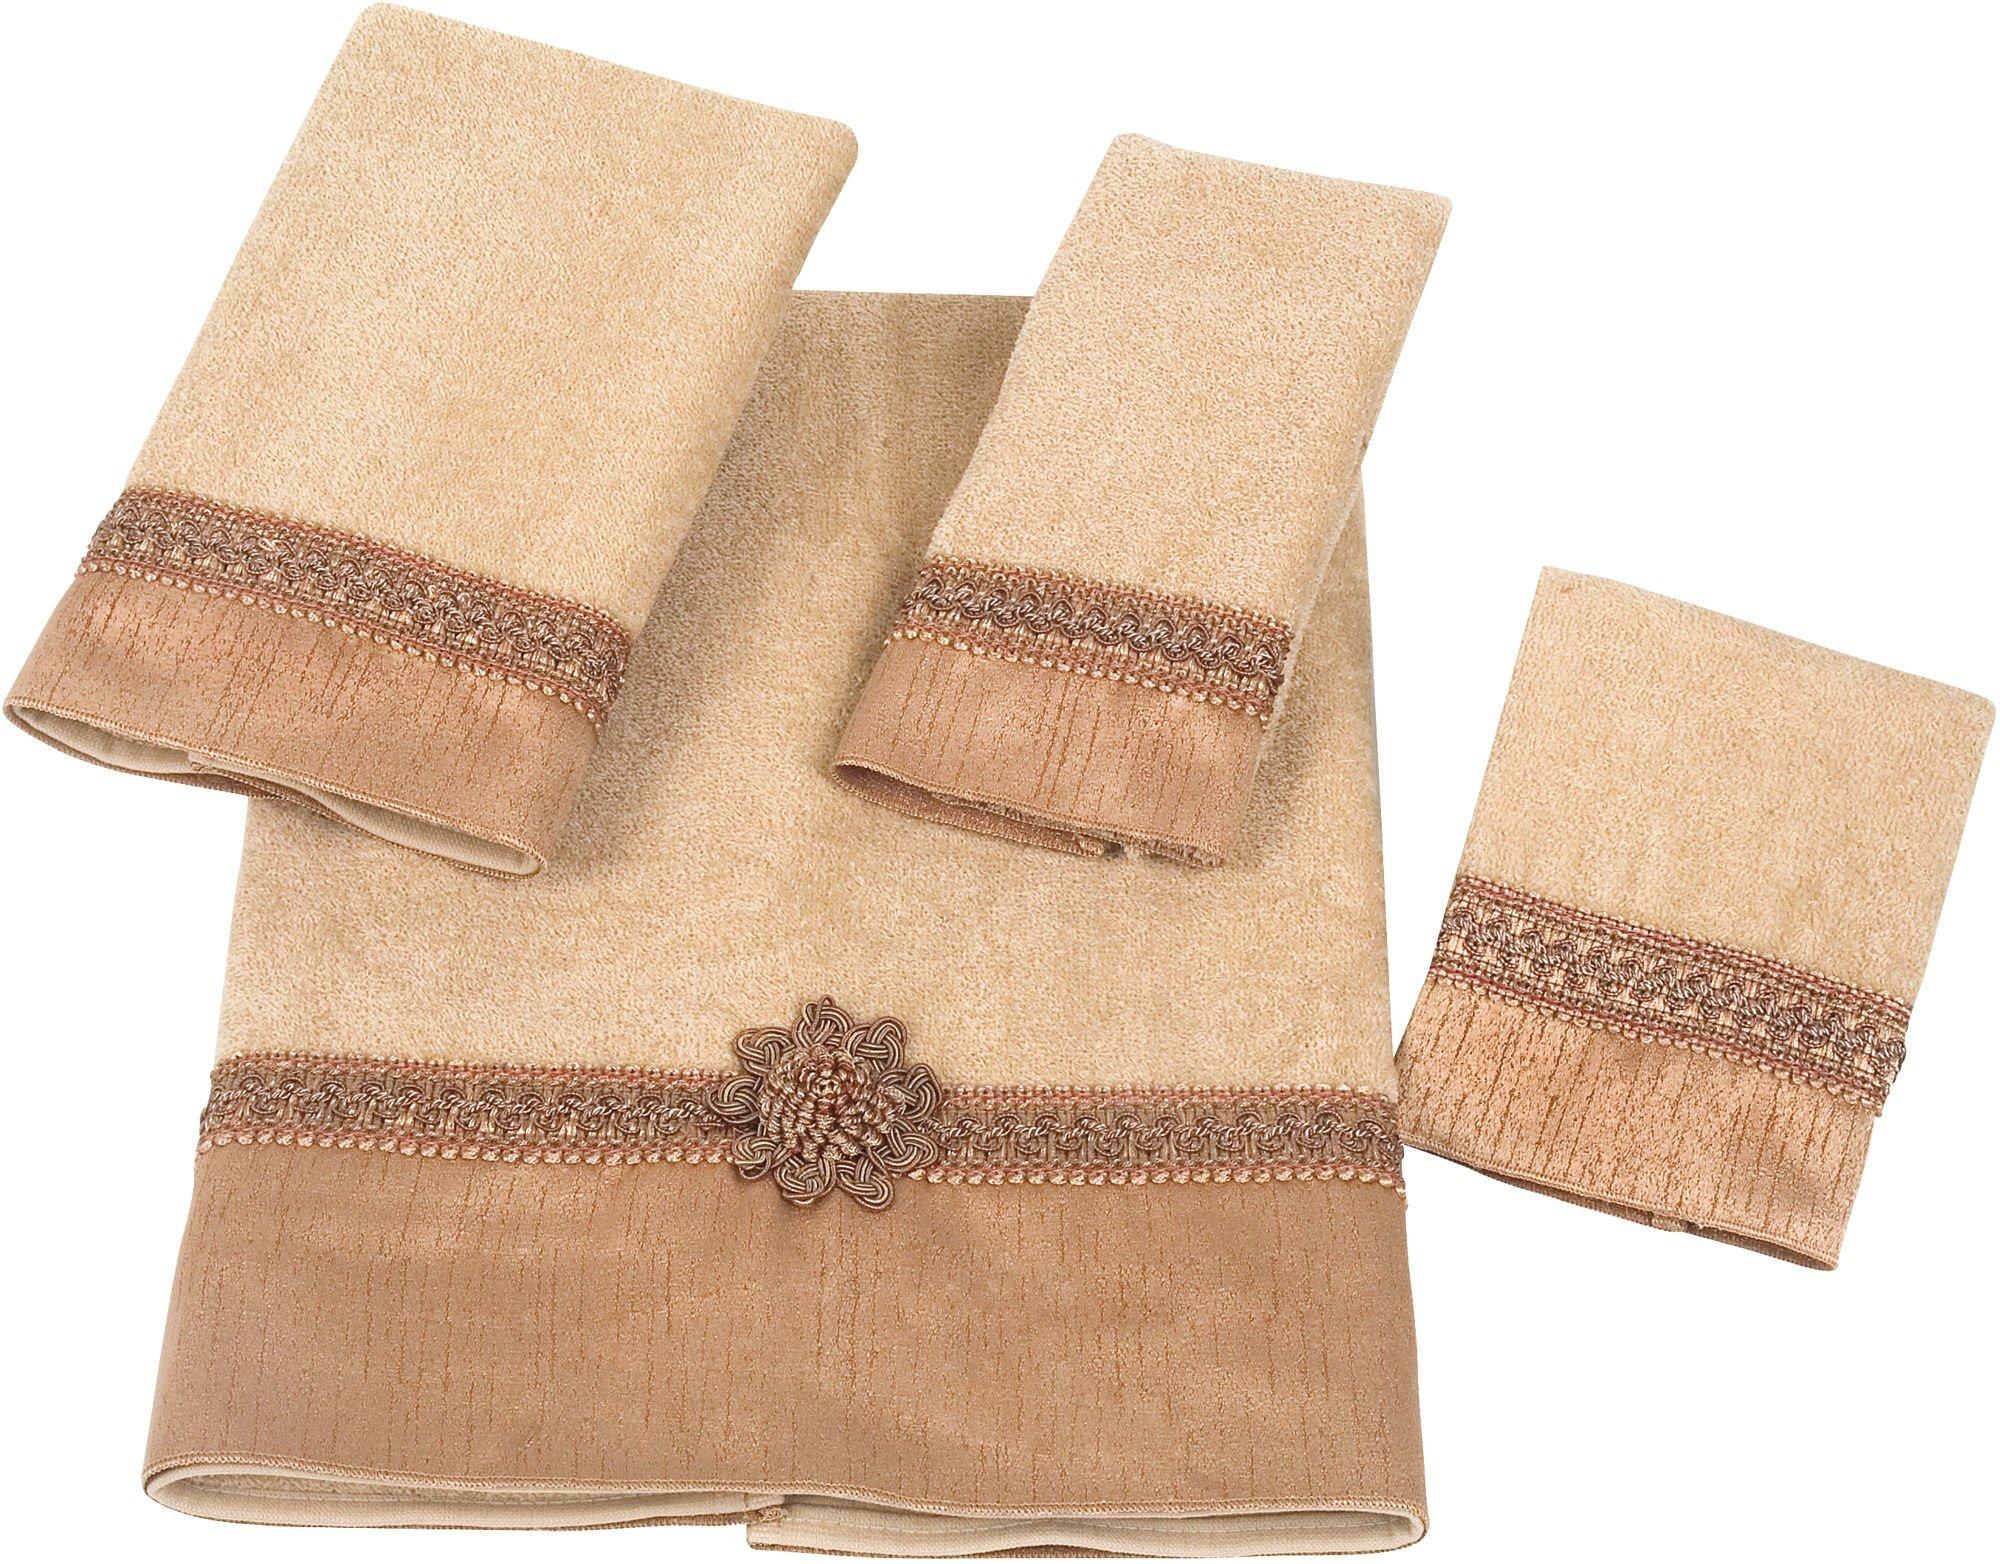 Rattan Braided Cuff Towel Collection